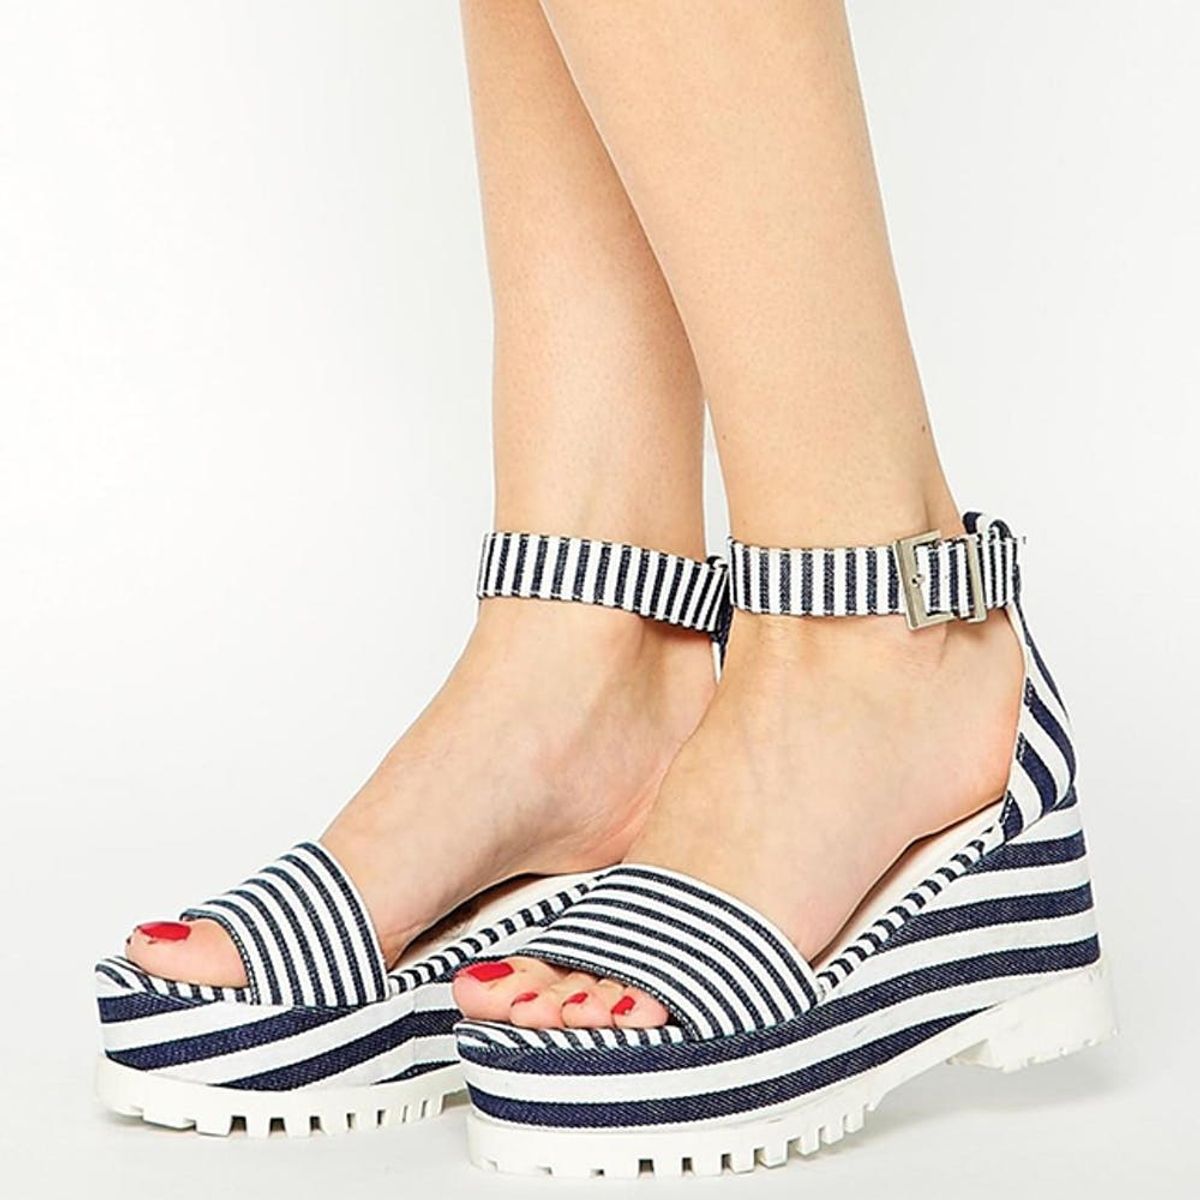 8 Tips for Getting Your Feet Sandal-Ready for Summer